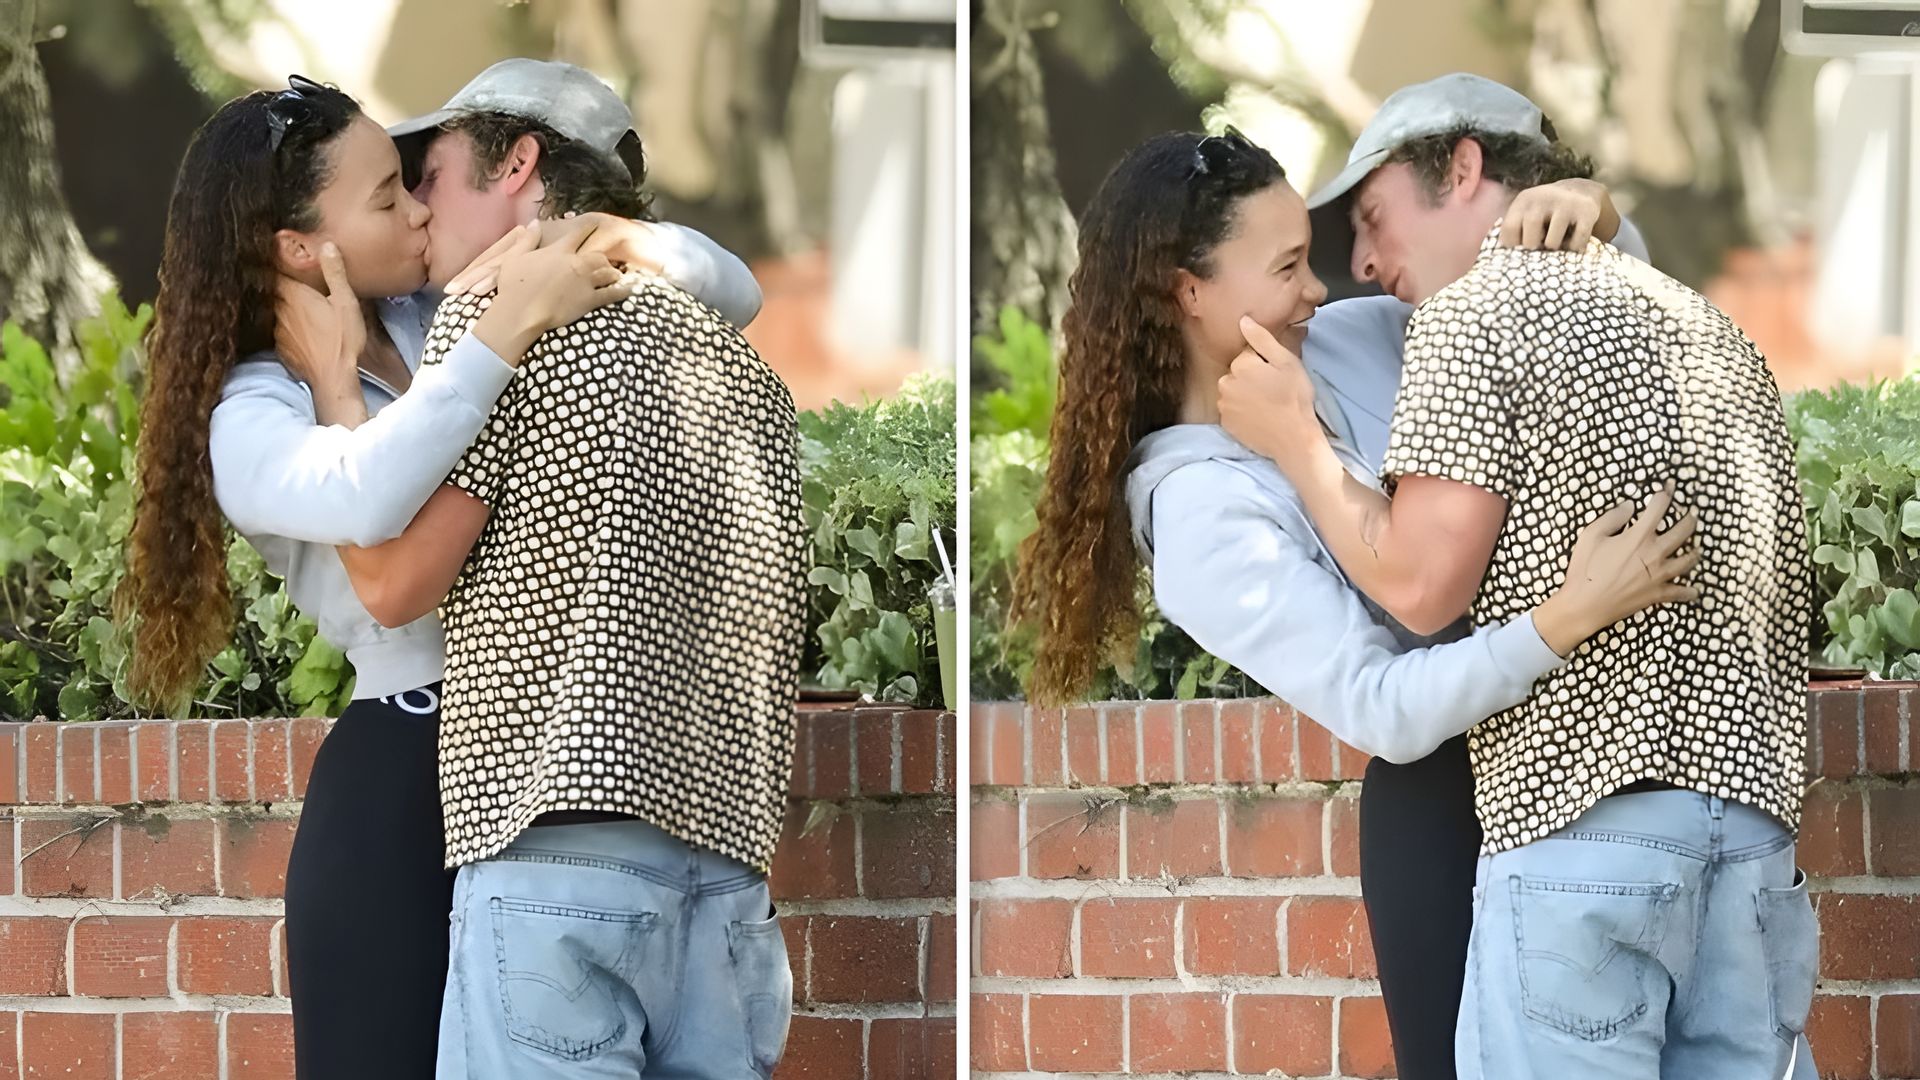 Jeremy Allen White and Ashley Moore